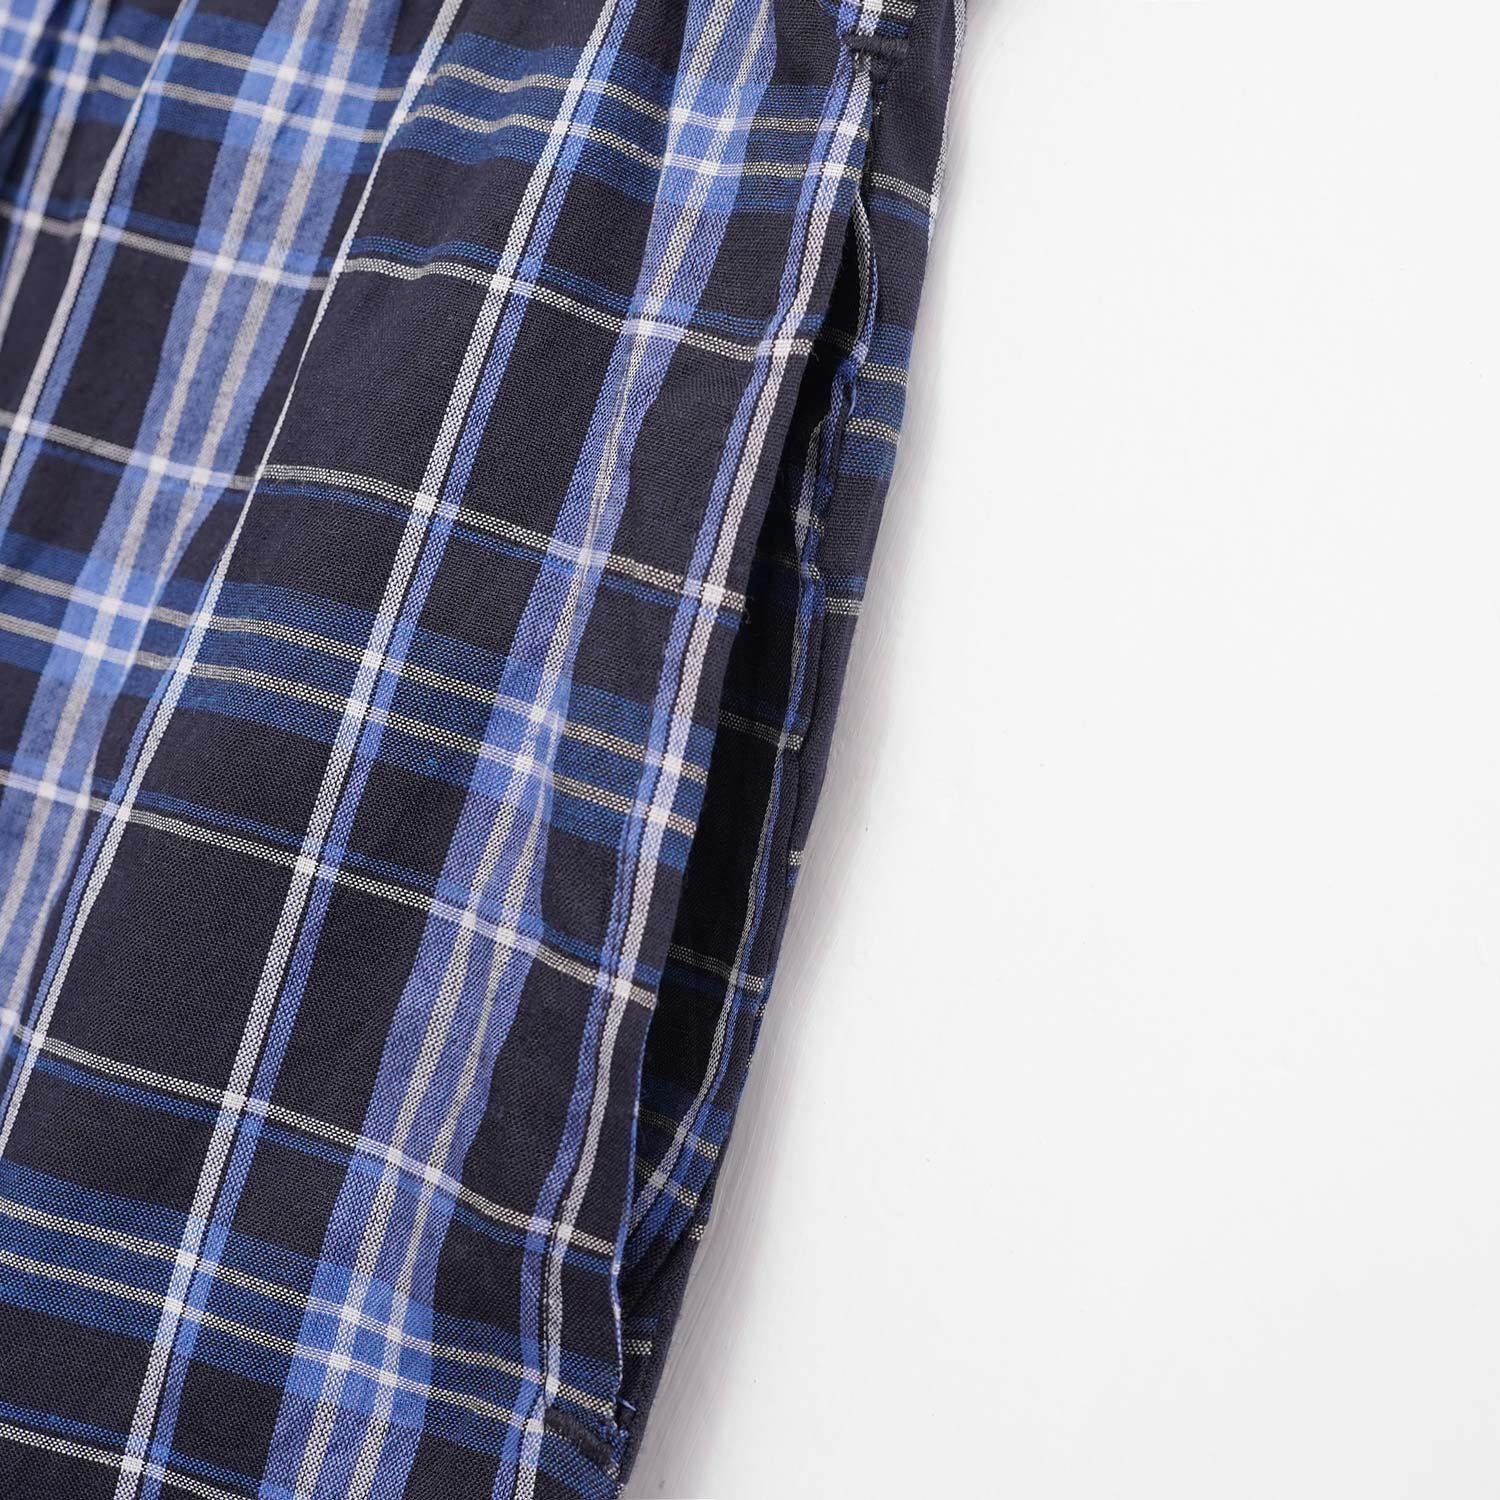 HG Exclusive Men's Cotton Check Style Summers Trouser - Navy